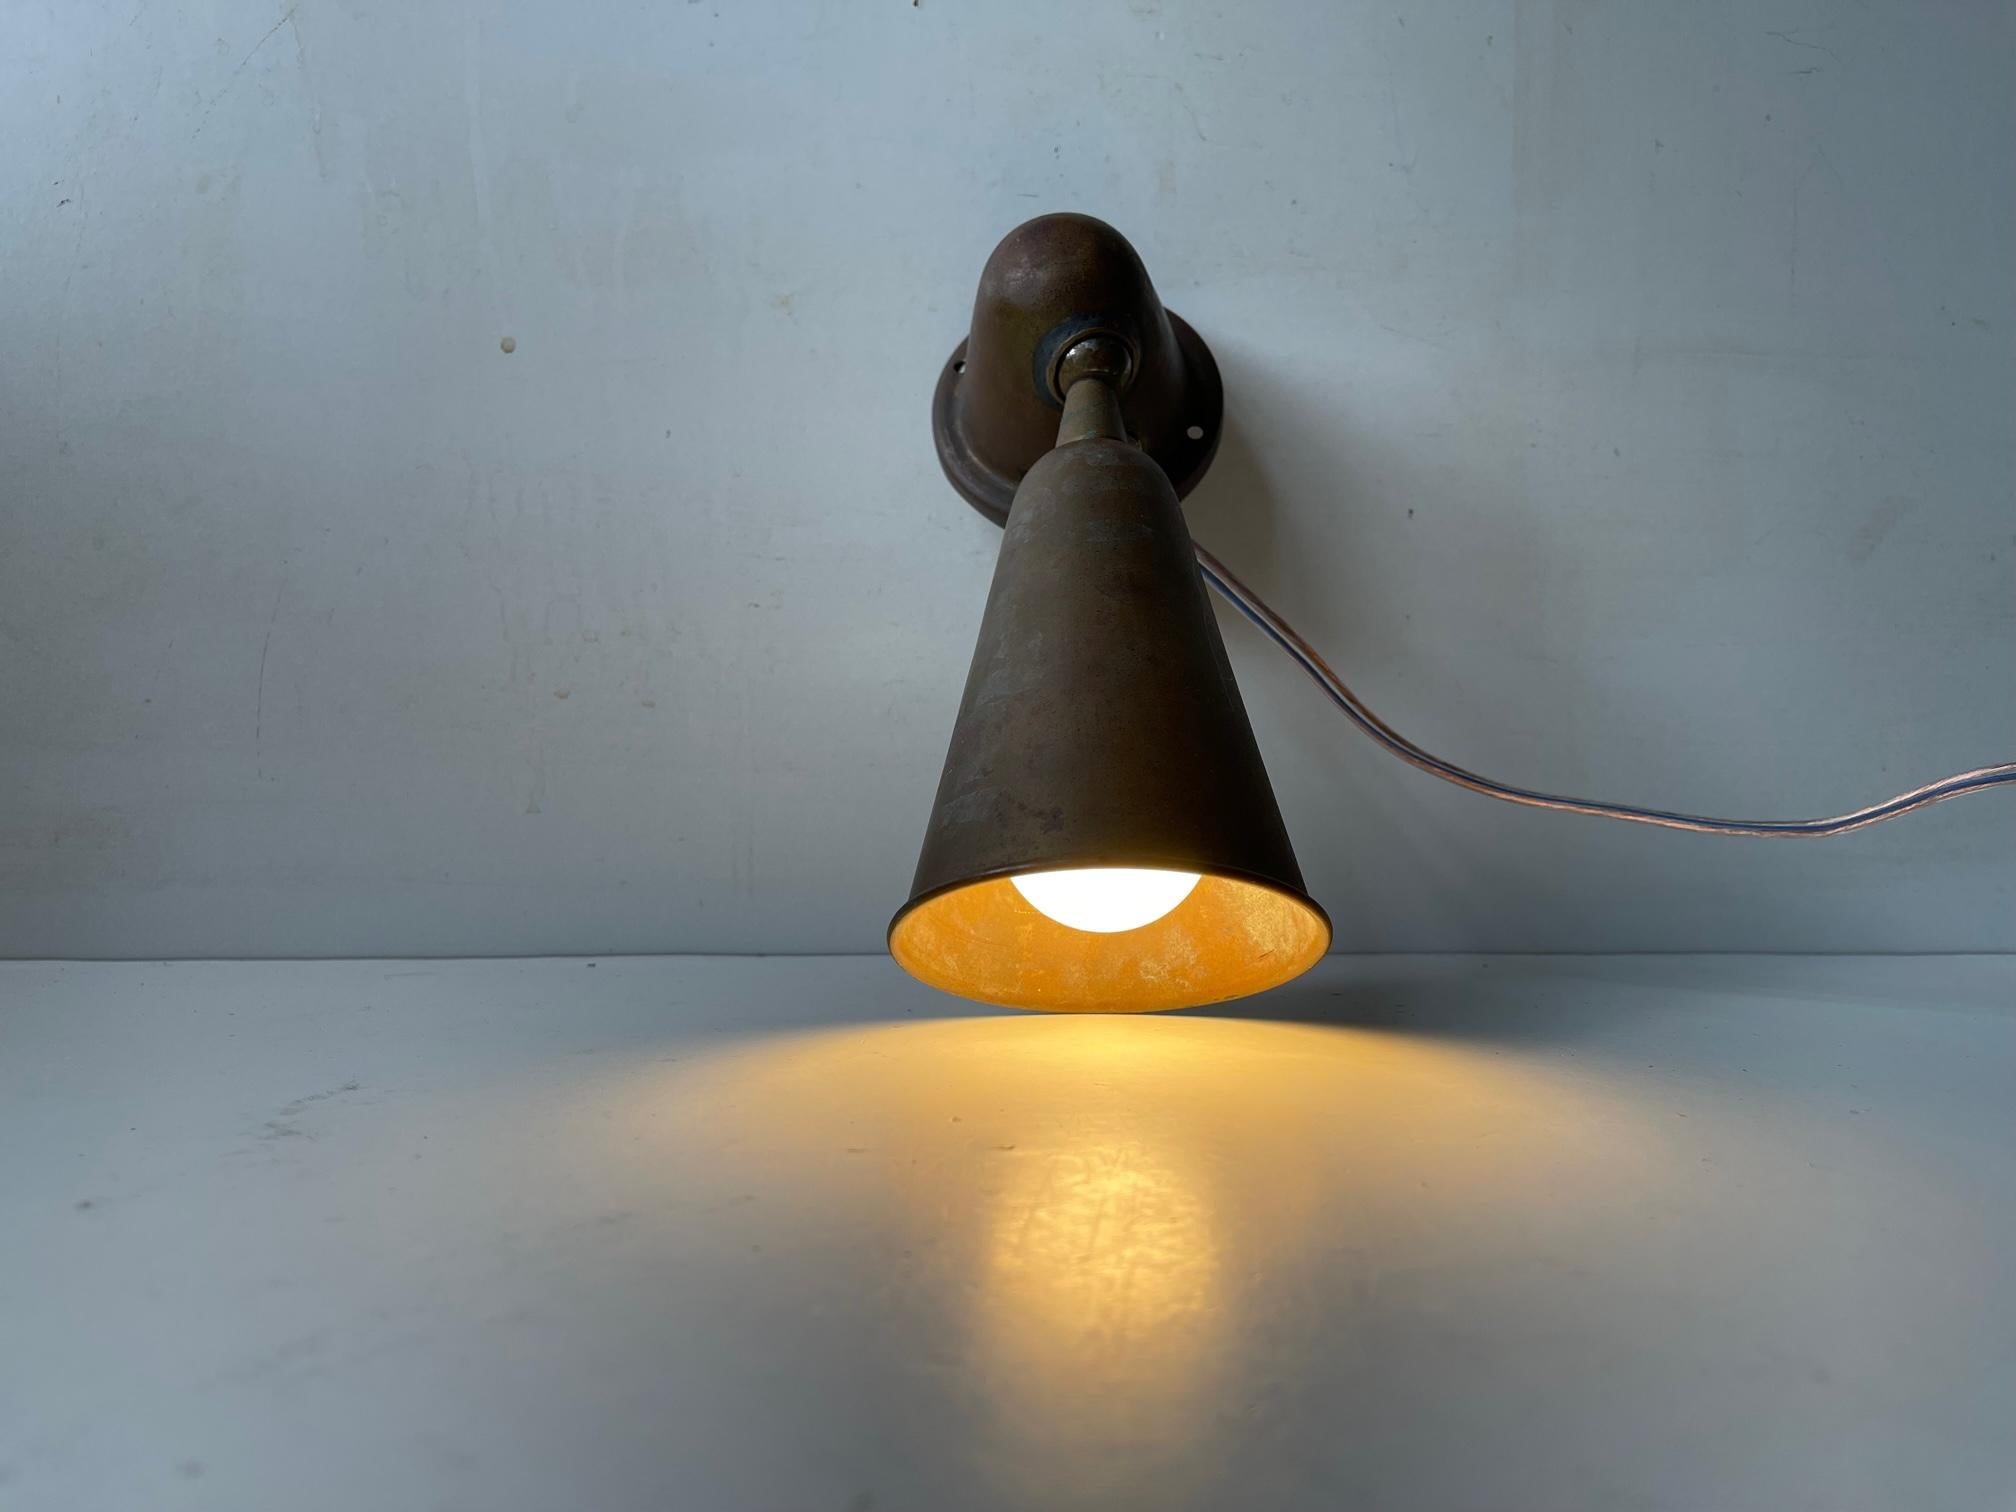 European Nautical Bauhaus Era Wall Sconce in Patinated Copper, 1930s For Sale